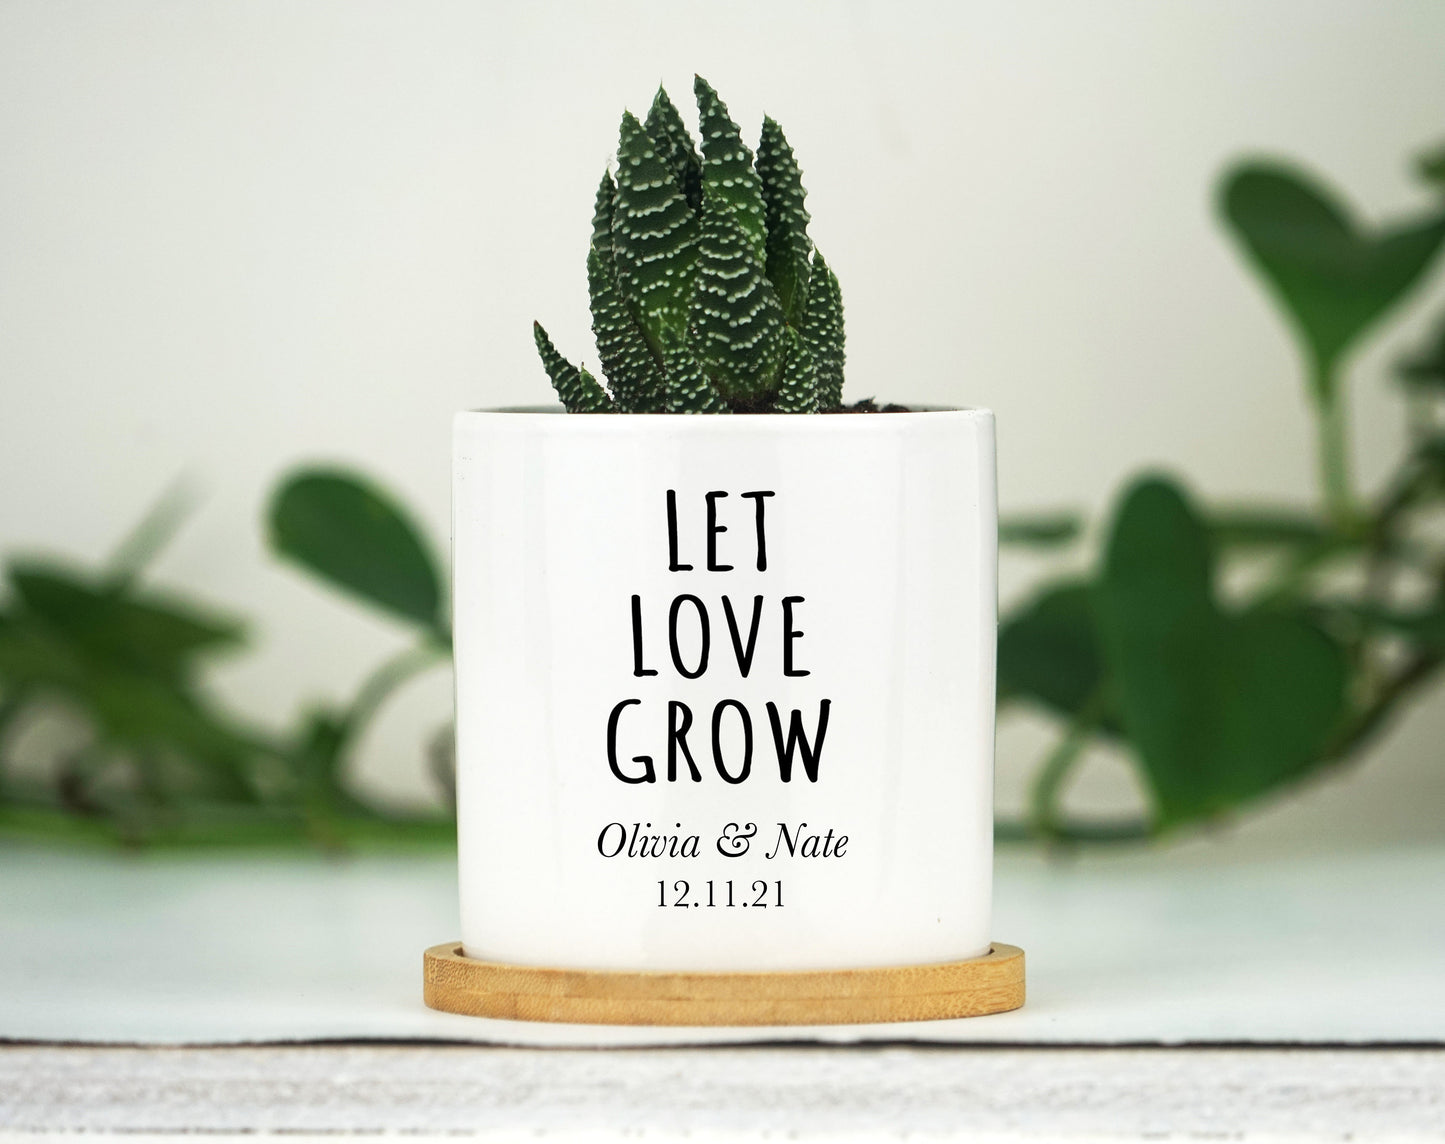 Personalized Planter Engagement Gift - 3" White Ceramic Pot w/ Bamboo Tray - Custom Succulent Pot - Newly Engaged - Let Love Grow